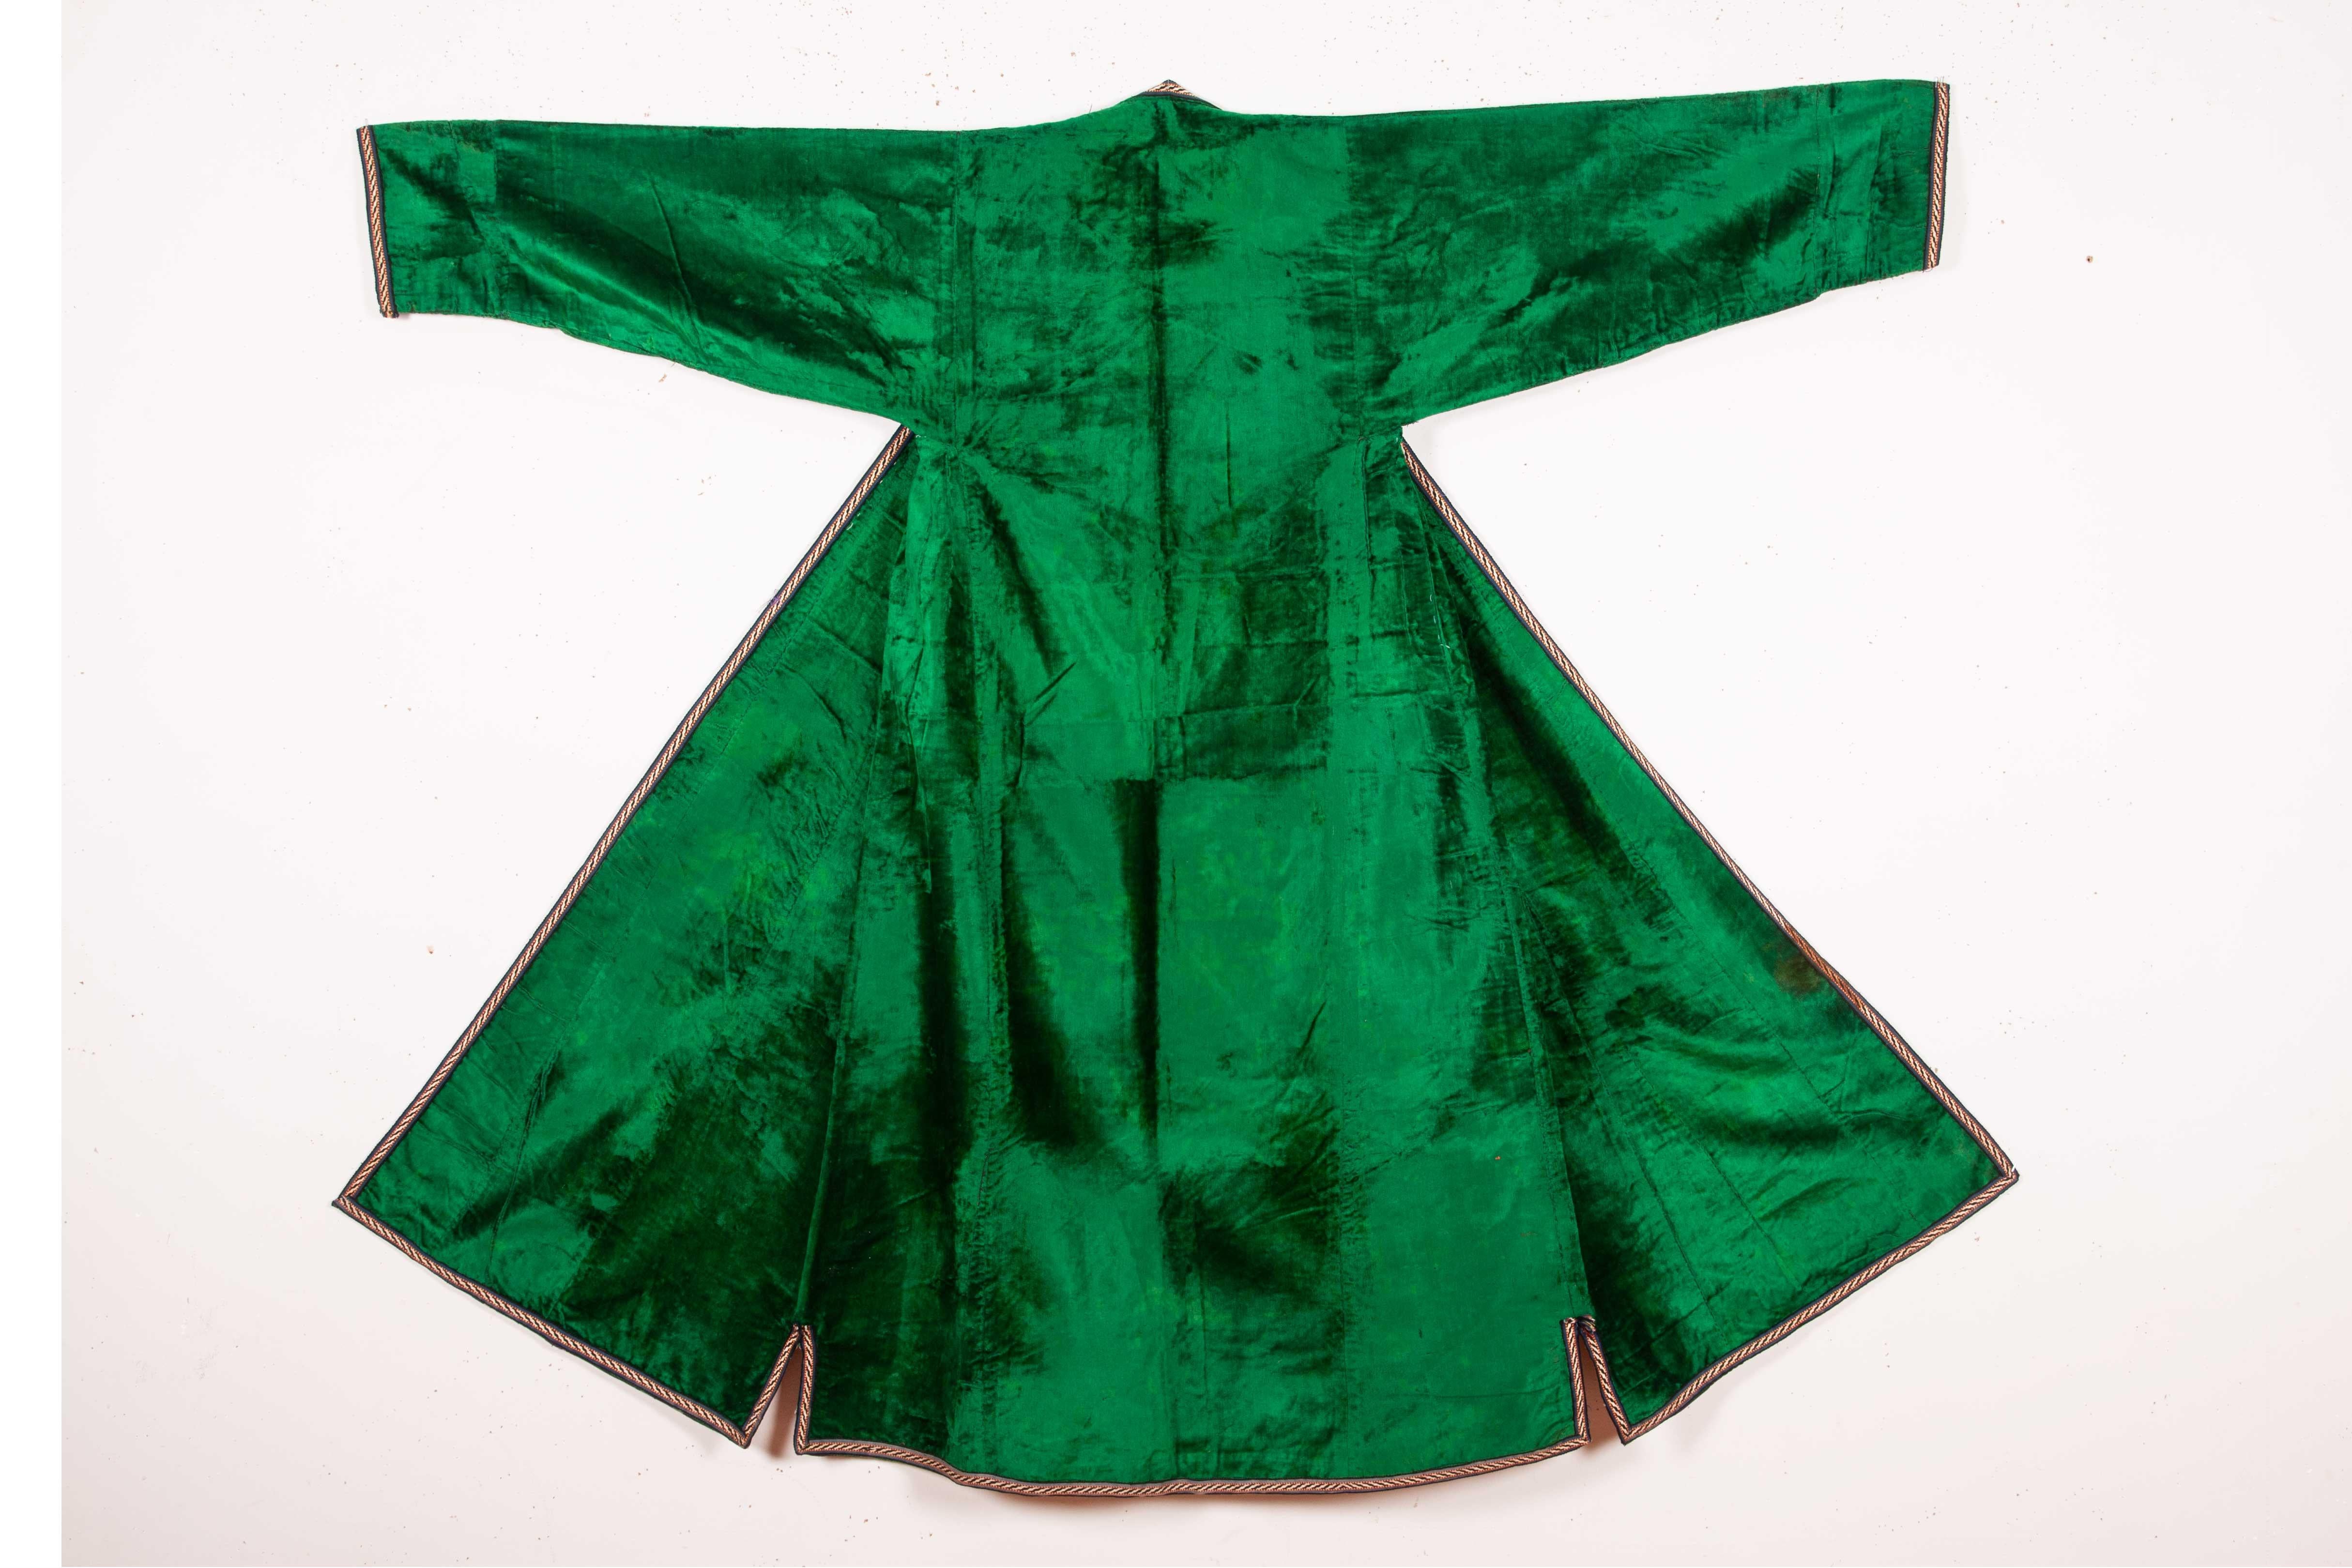 Early 20th century silk green velvet chapan with a Russian print lining. Lovely example in good condition.
Measures: Sleeve to sleeve 63.39 in.
Neck to hem 56.3 in.